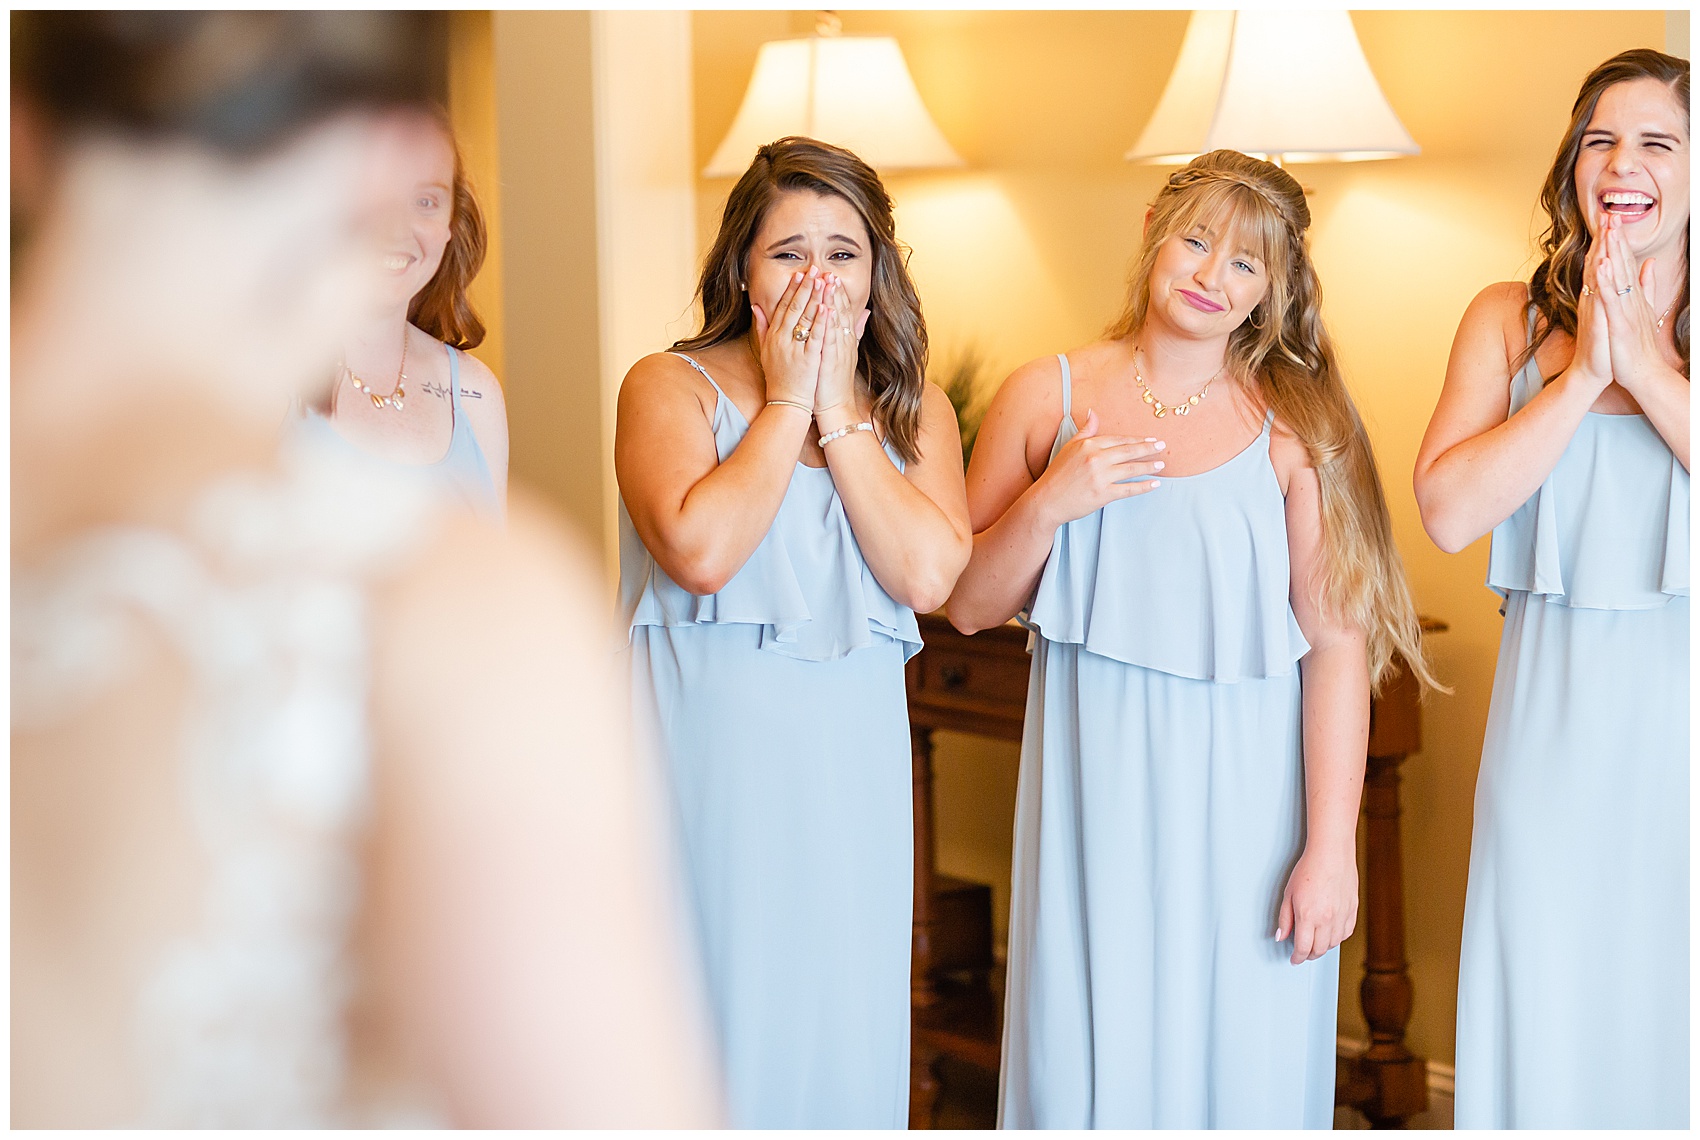 The bridesmaids see their best friend in her wedding dress for the first time | bridesmaids first look